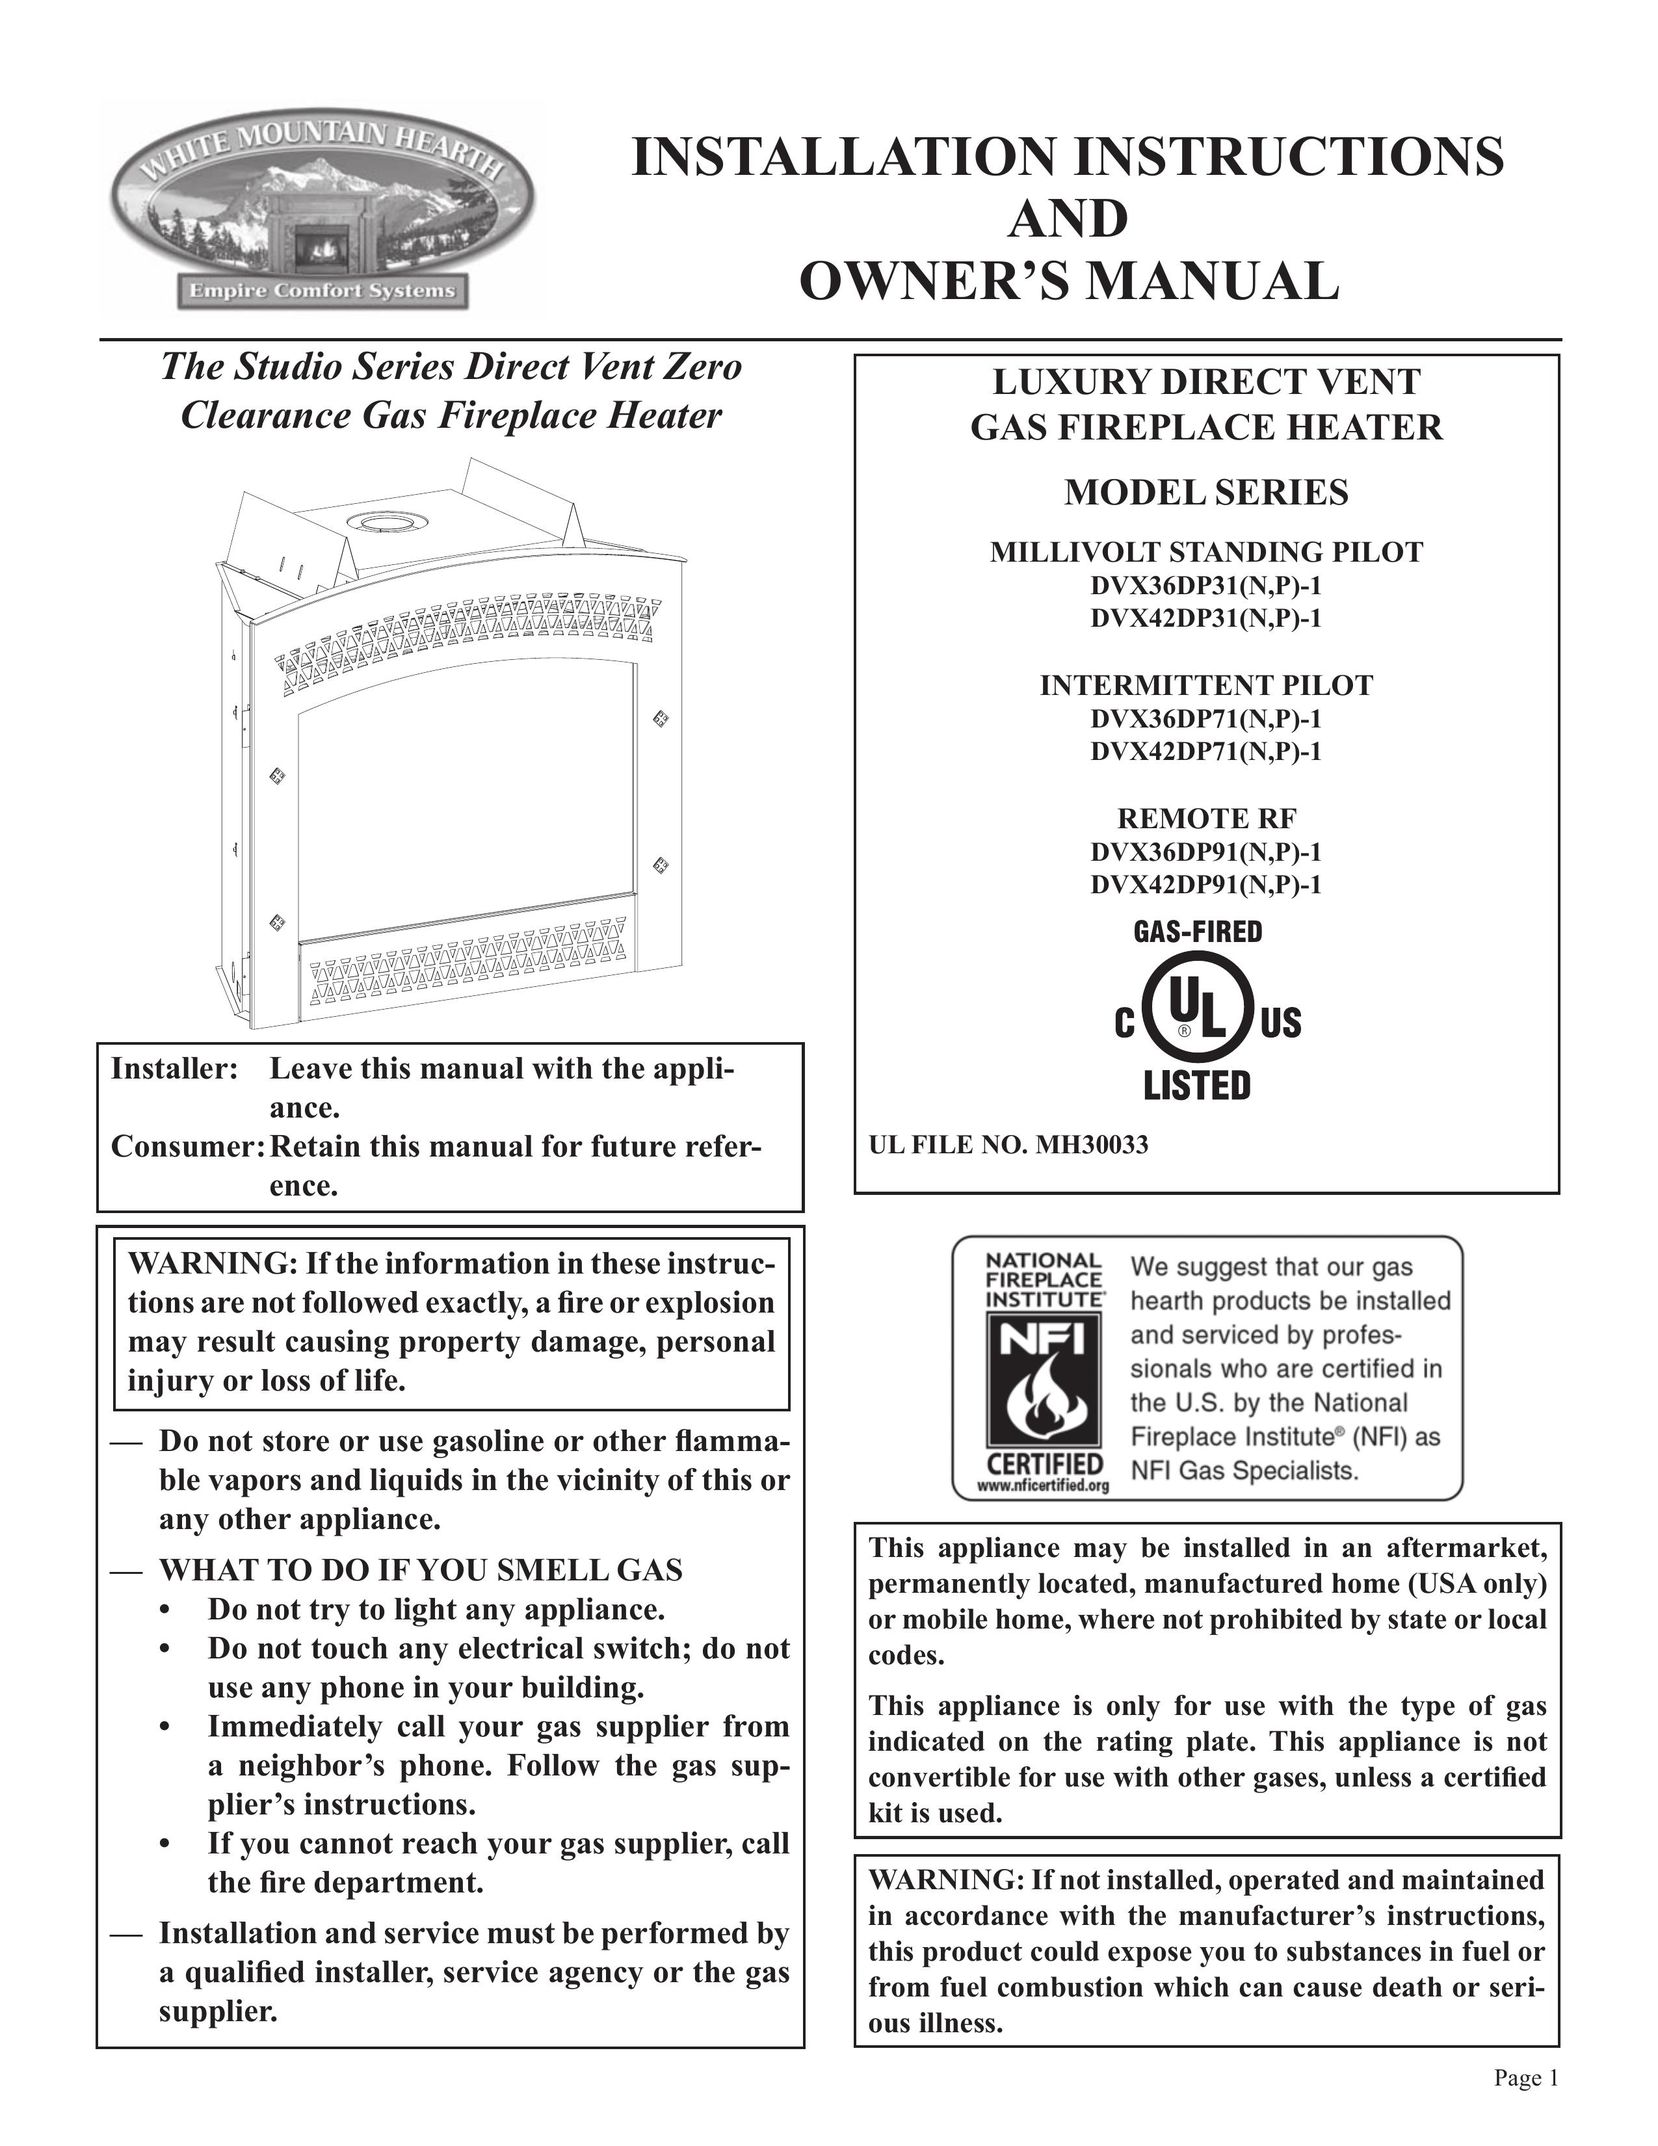 Empire Comfort Systems DVX42DP31(N,P)-1 Gas Heater User Manual